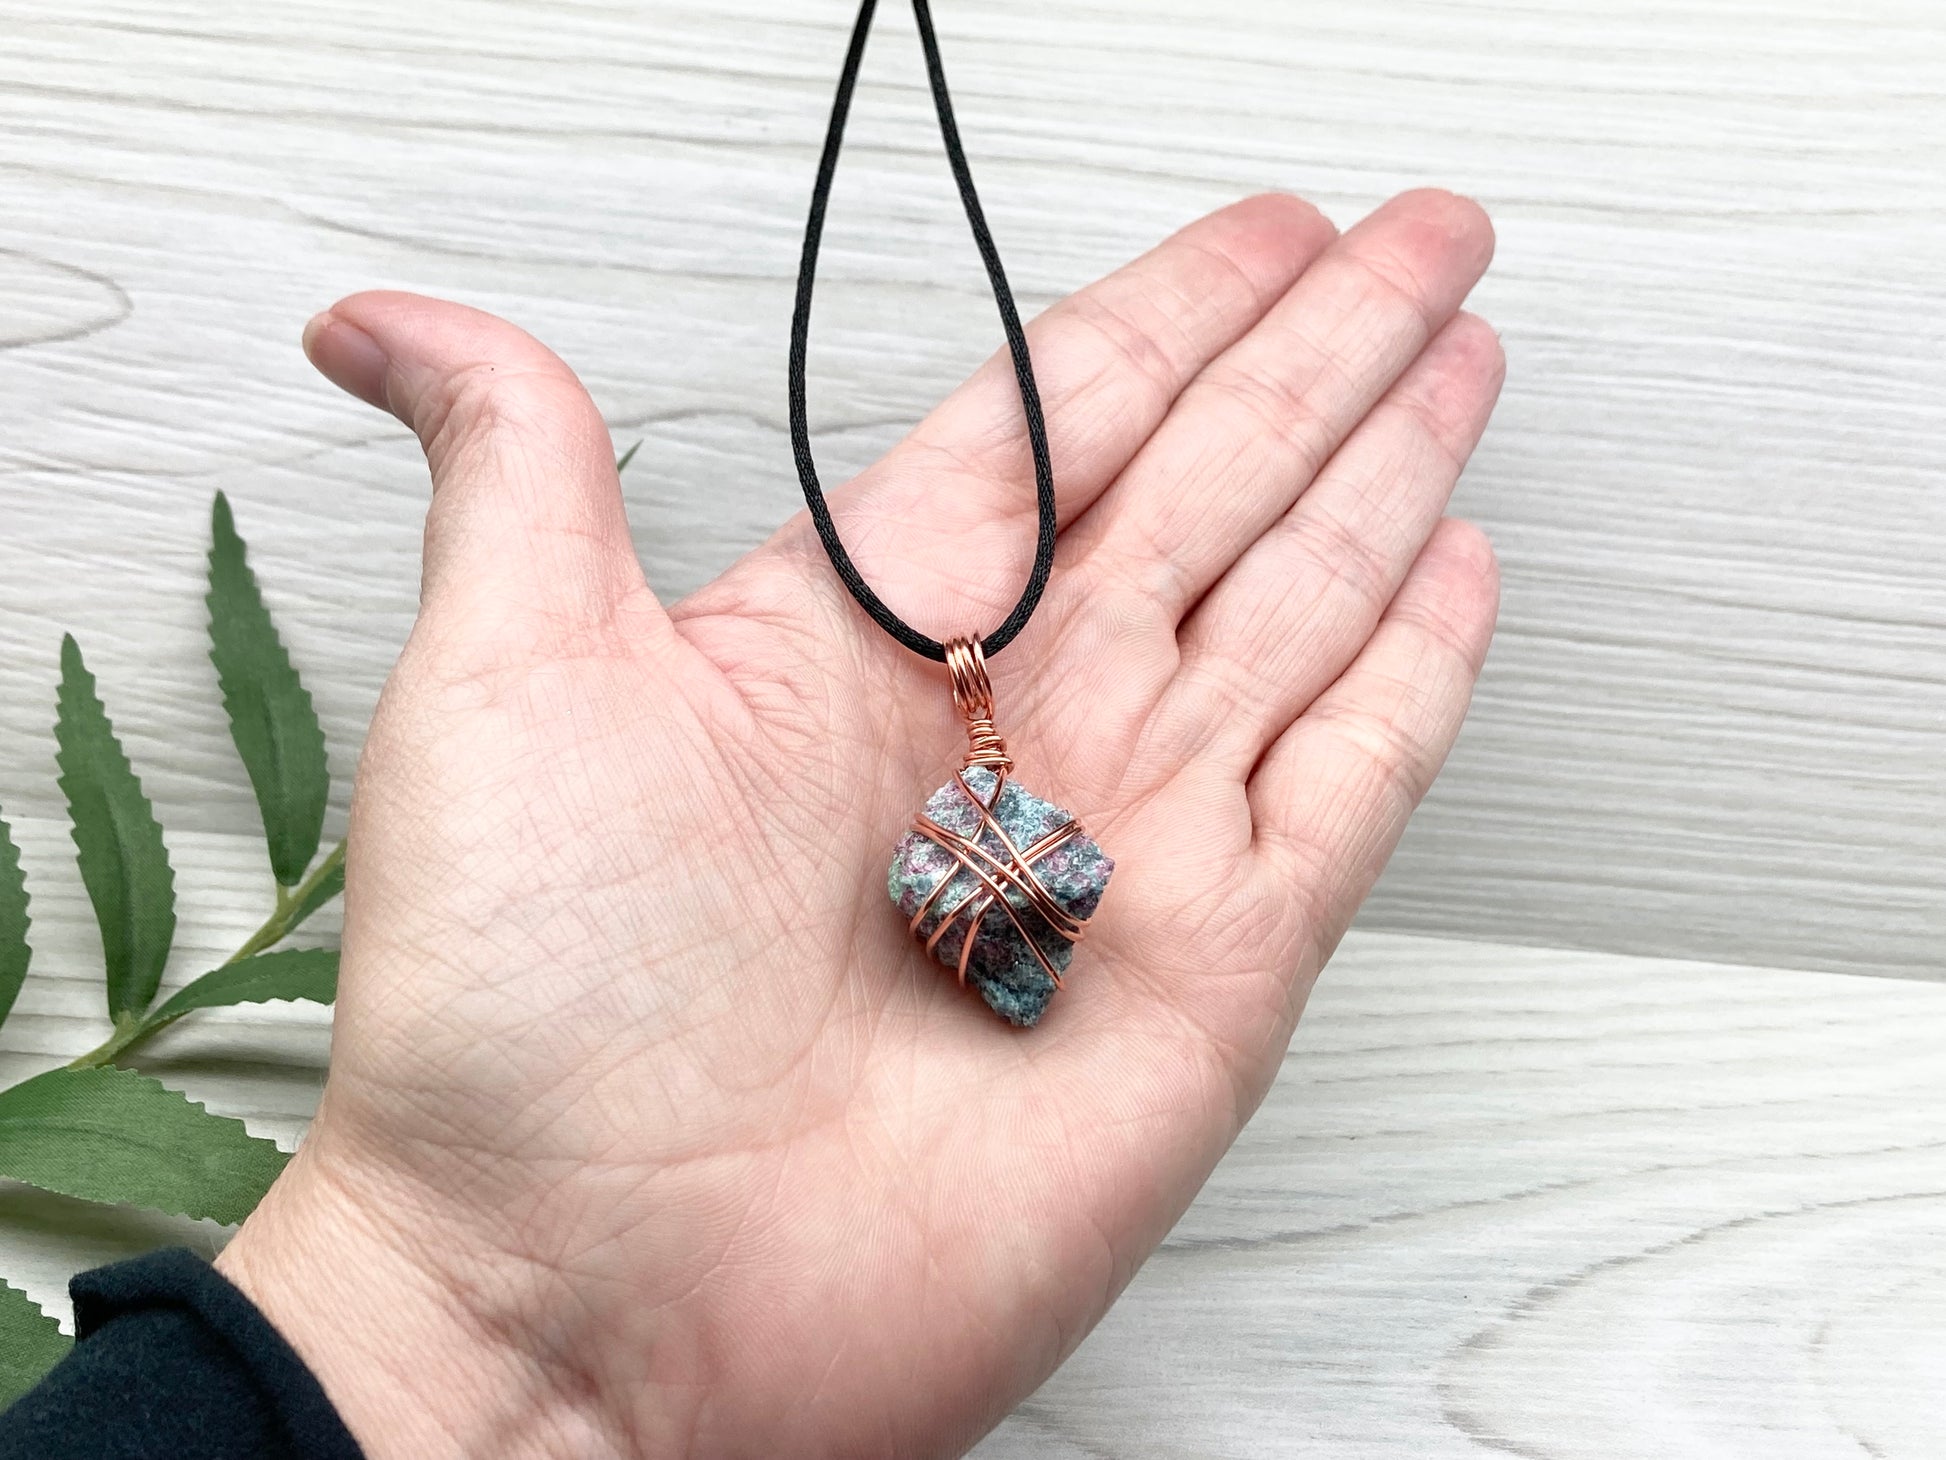 Rough Raw Ruby Zoisite Necklace. This Ruby Zoisite Crystal Is Hand Wrapped With Pure Copper Wire. This Stone is Blue and Red Colored. Gemstone Comes On A Black Chain. Pendant Measures 1.6 X 0.8 Inches. Spiritual New Age Style Unisex Jewelry.